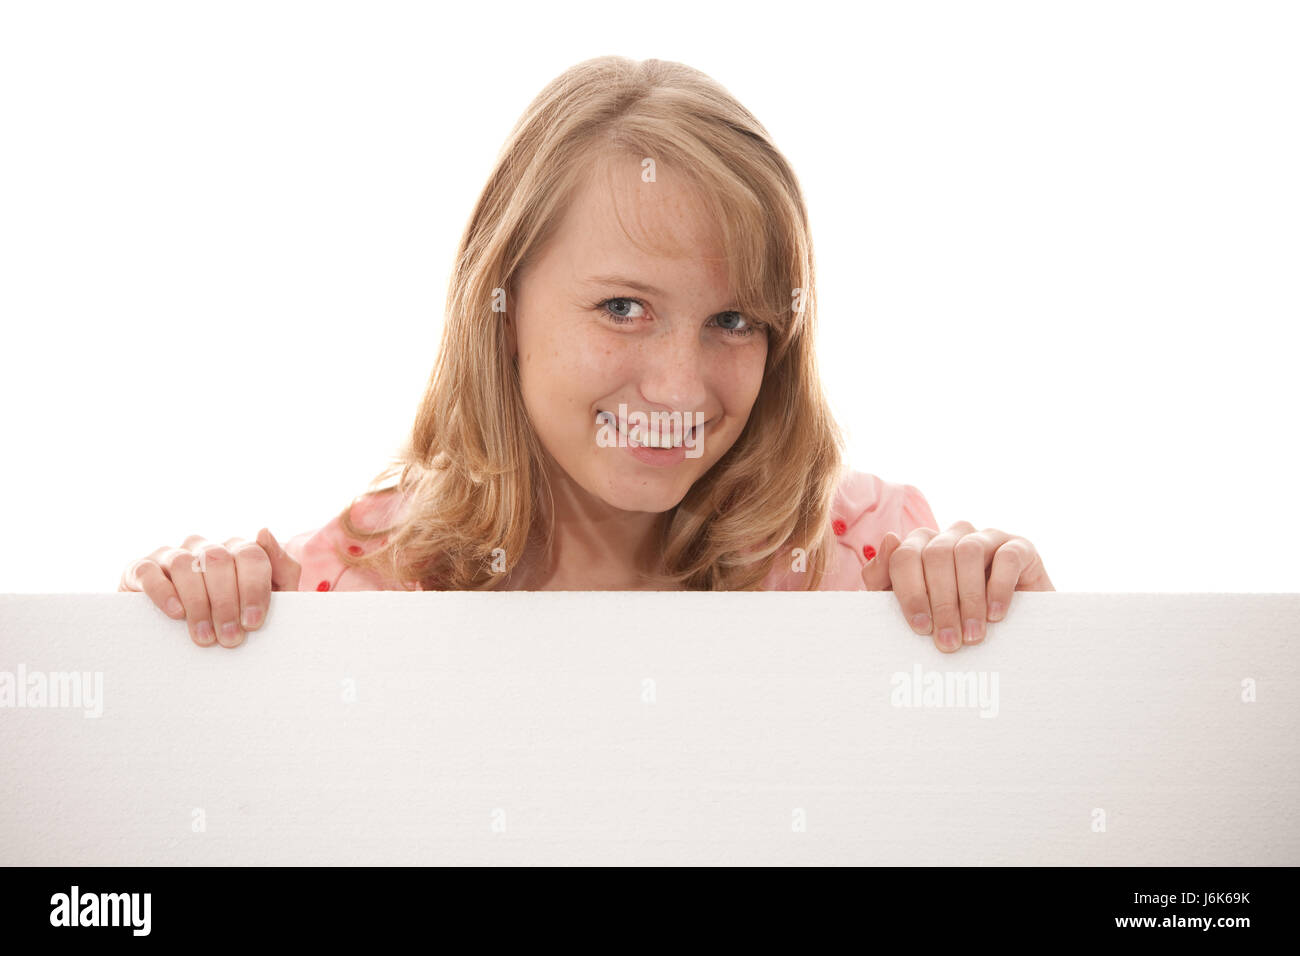 woman with sign Stock Photo